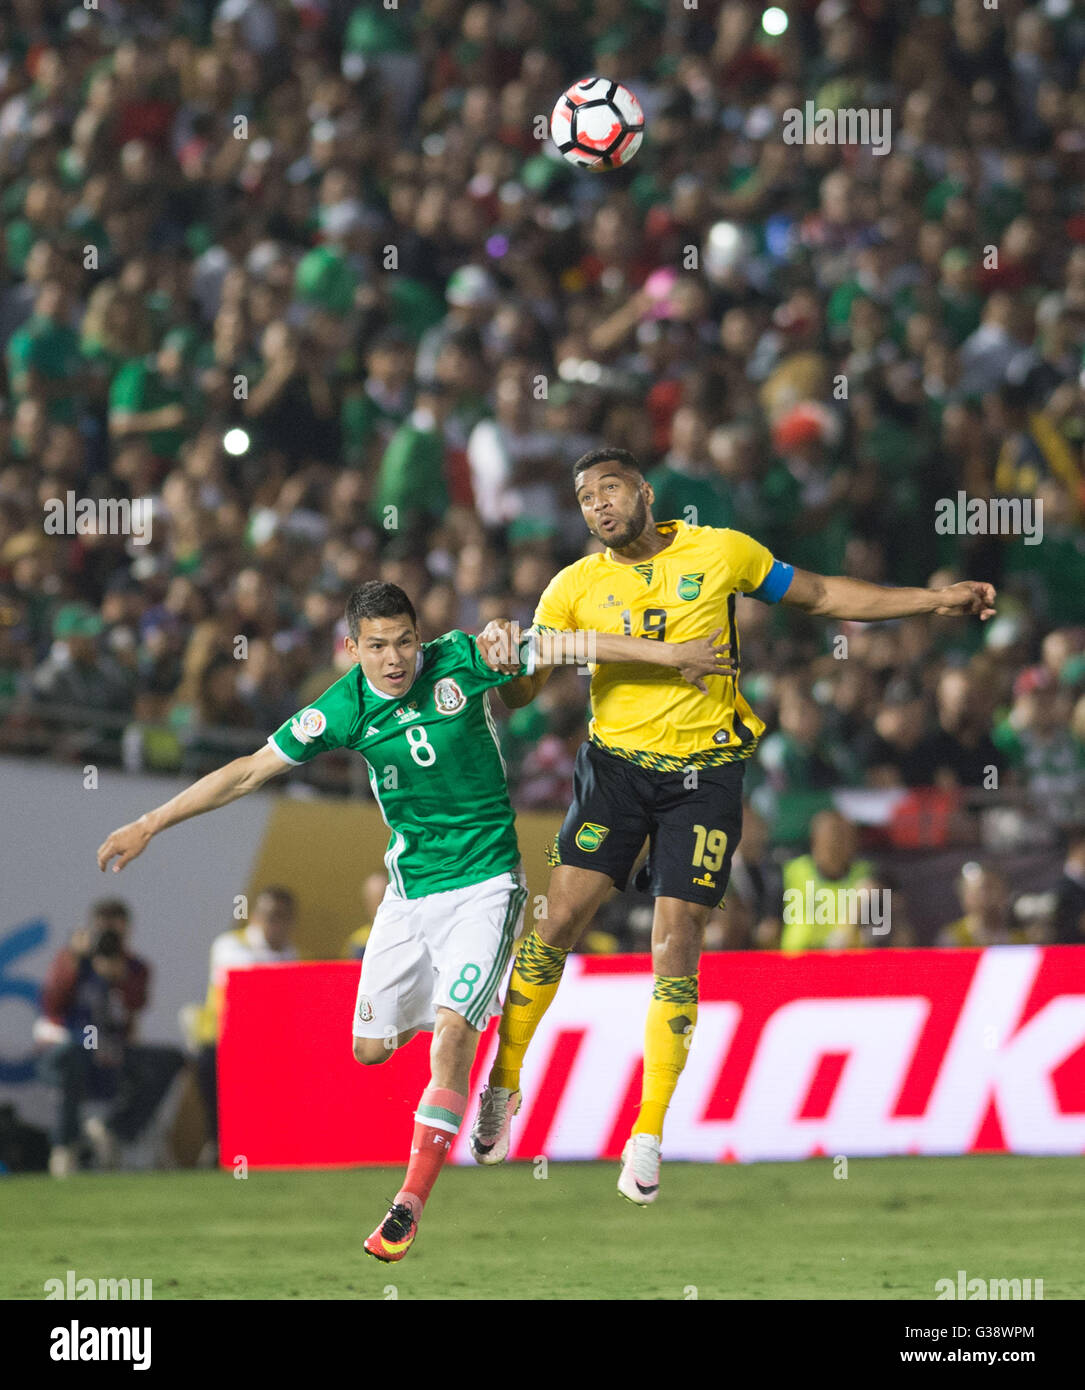 Pasadena, USA. 9th June, 2016. Mexico's Hirving Lozano (L) vies with Jamaica's Giles Barnes during the Copa America Centenario tournament Group C football match in Pasadena, California, the United States, on June 9, 2016. Credit:  Yang Lei/Xinhua/Alamy Live News Stock Photo